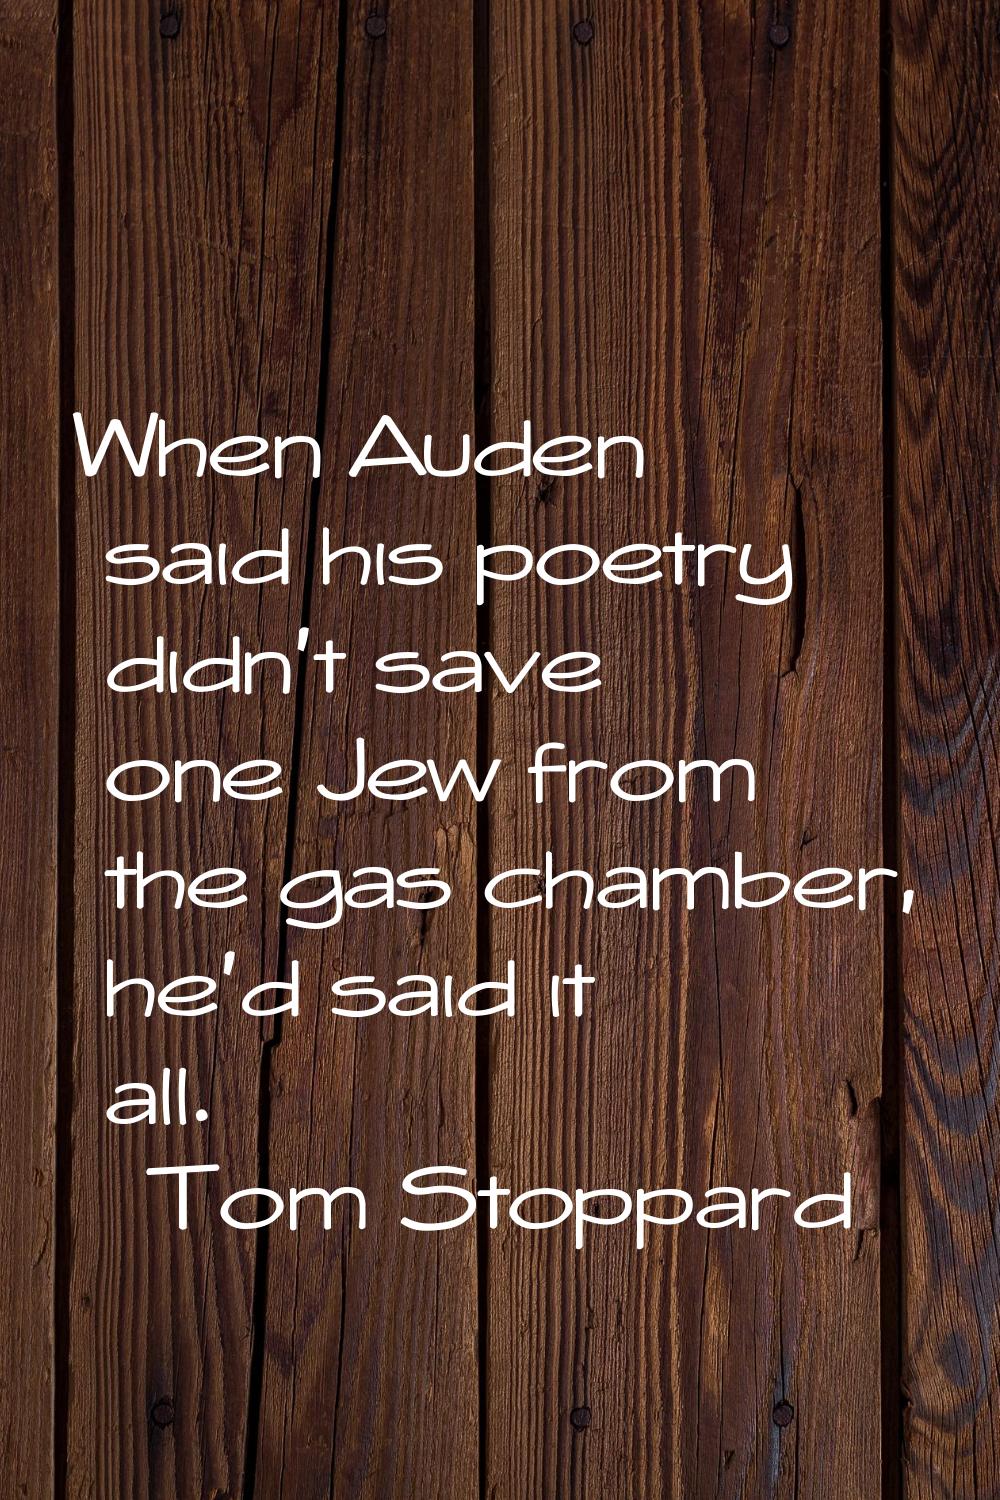 When Auden said his poetry didn't save one Jew from the gas chamber, he'd said it all.